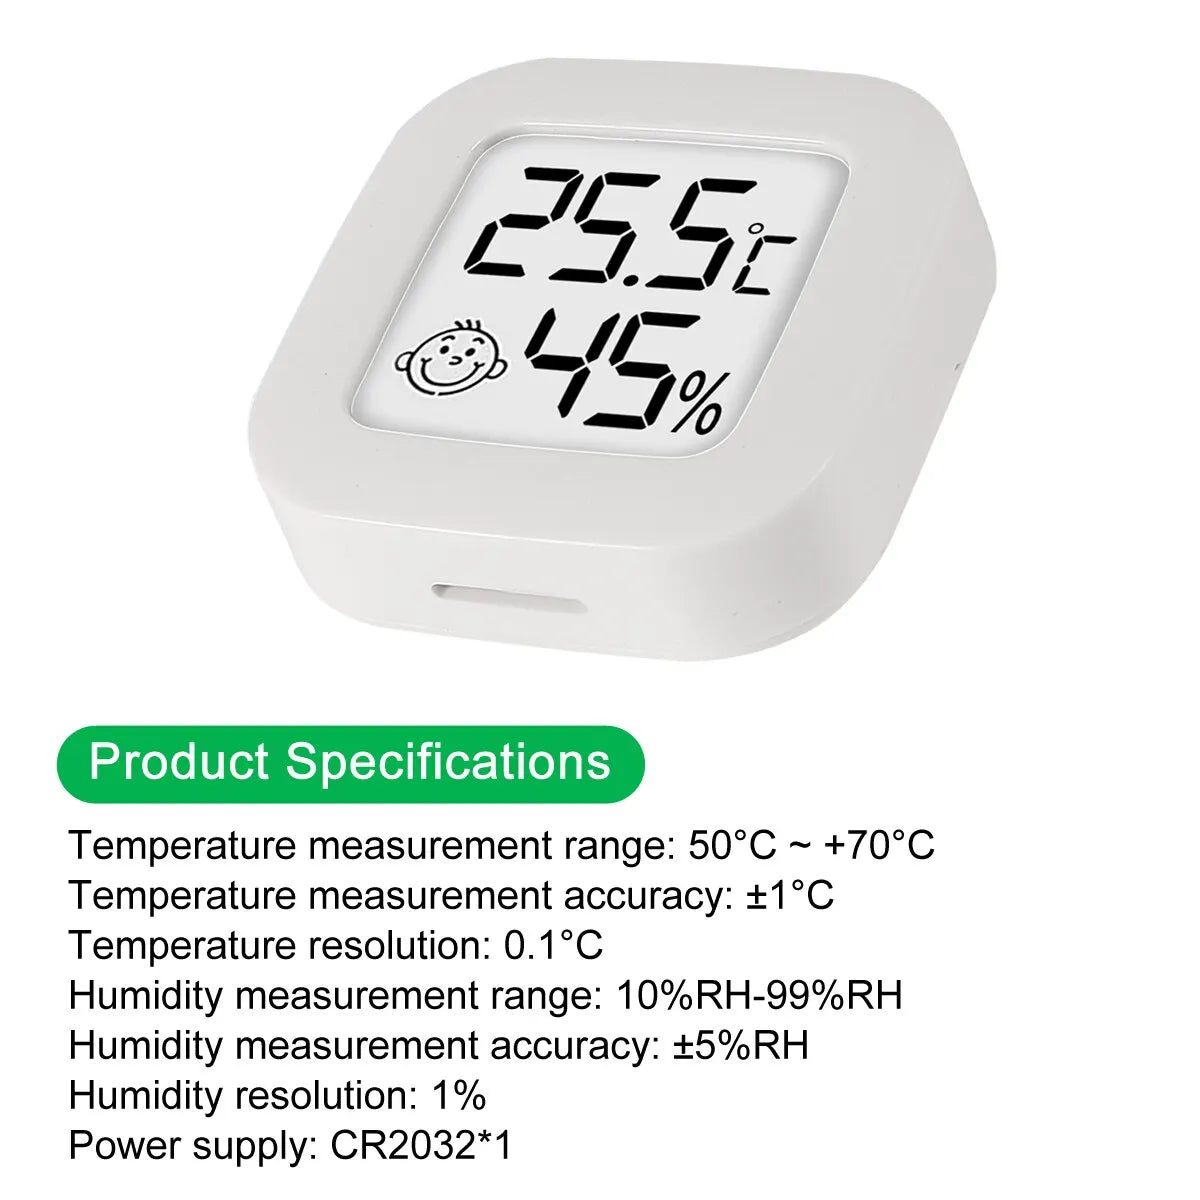 4pcs Digital Thermometer Hygrometer Indoor Mini Temperature LCD Electronic Monitor Hygrometer Outdoor Room Baby